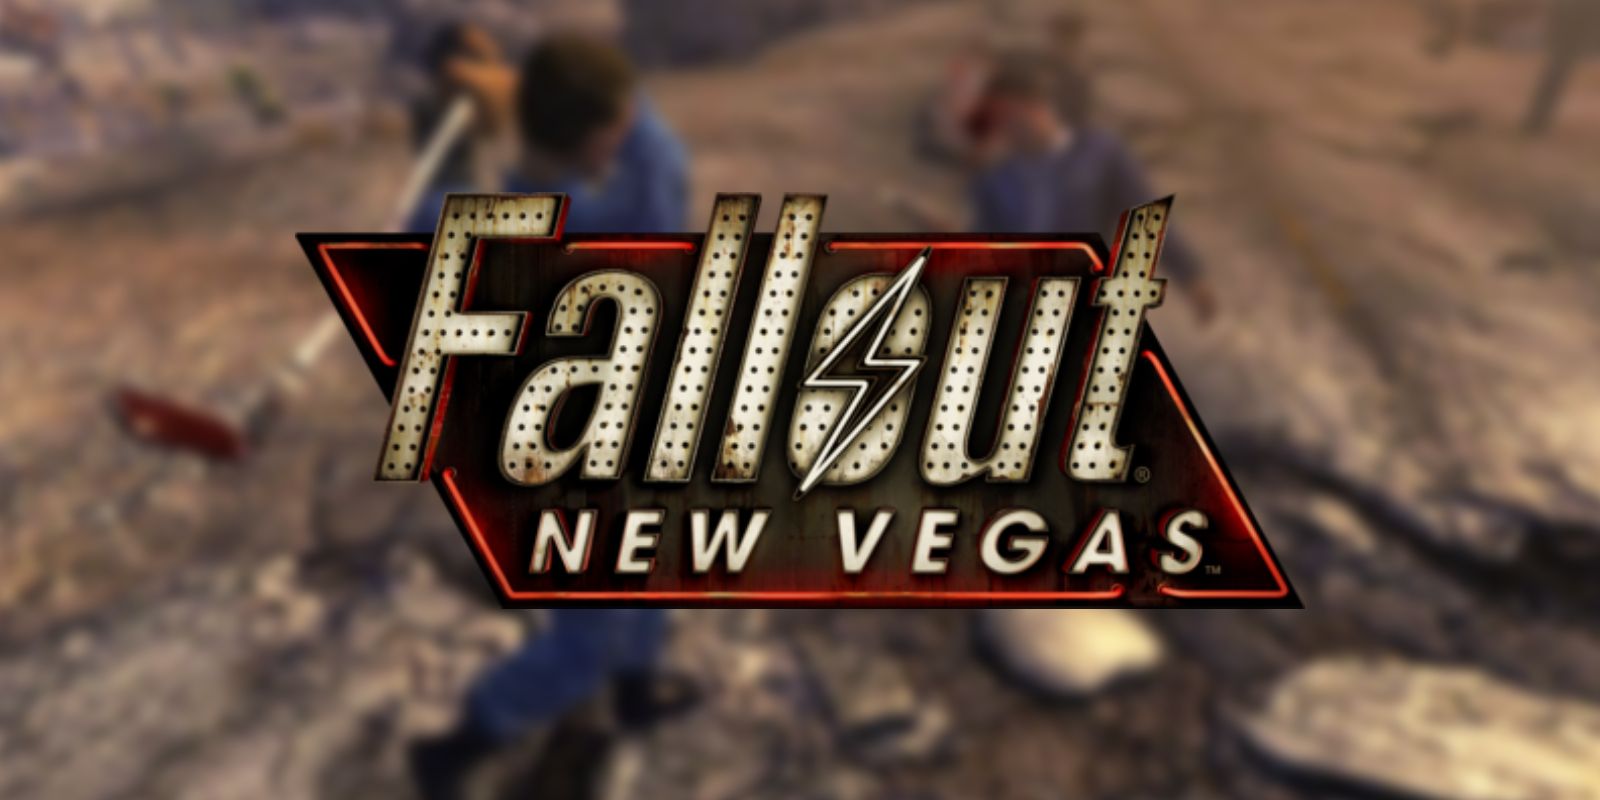 Fallout New Vegas's sign hangs over two survivors digging in the wasteland.